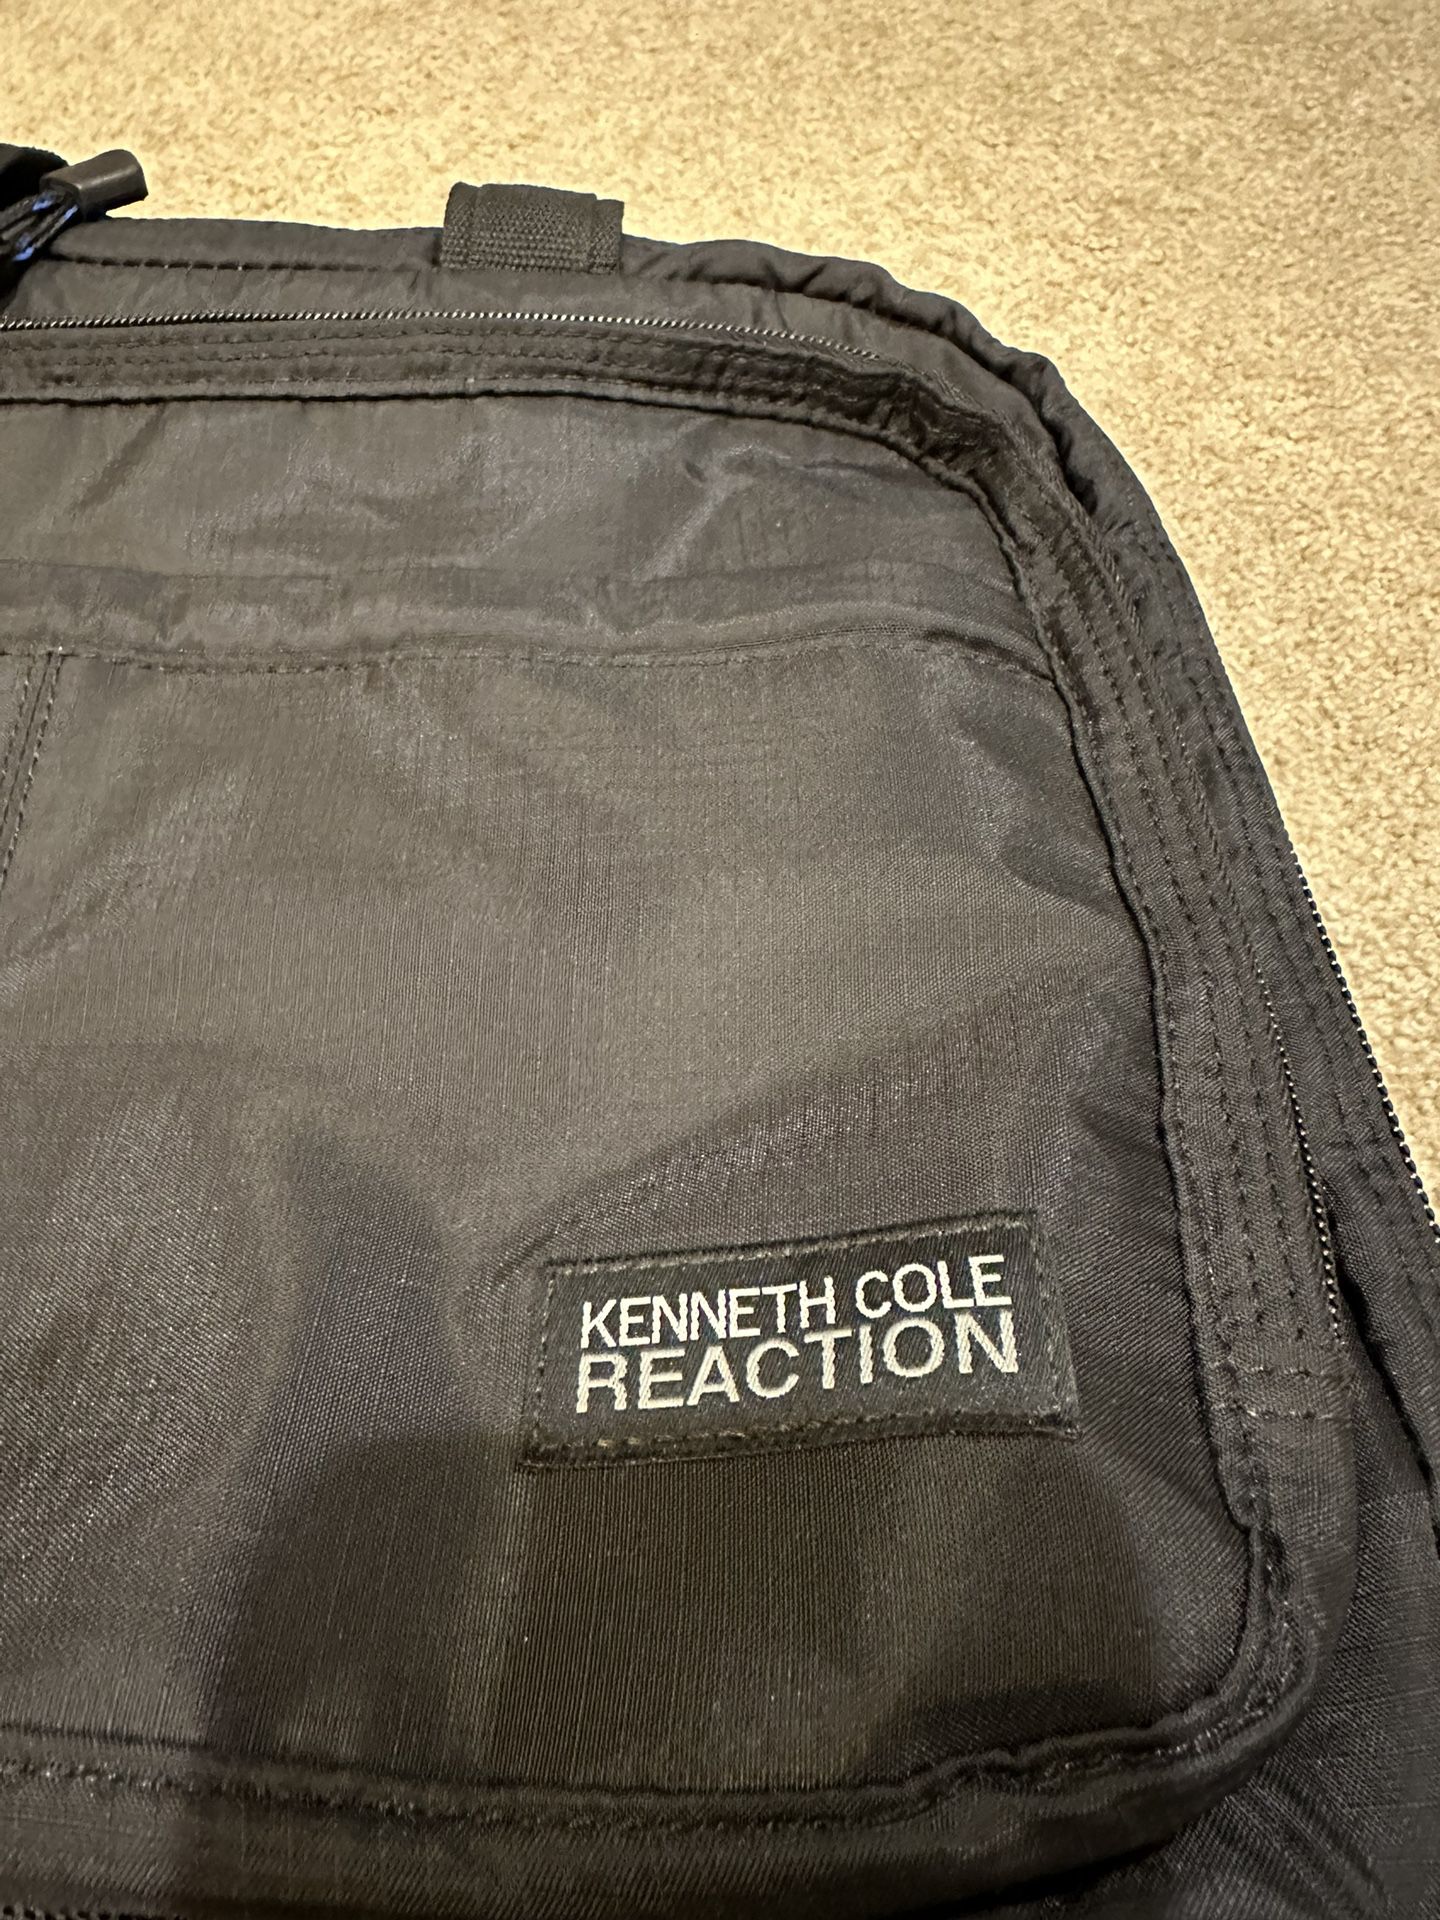 Kenneth Cole Reaction Briefcase backpack 